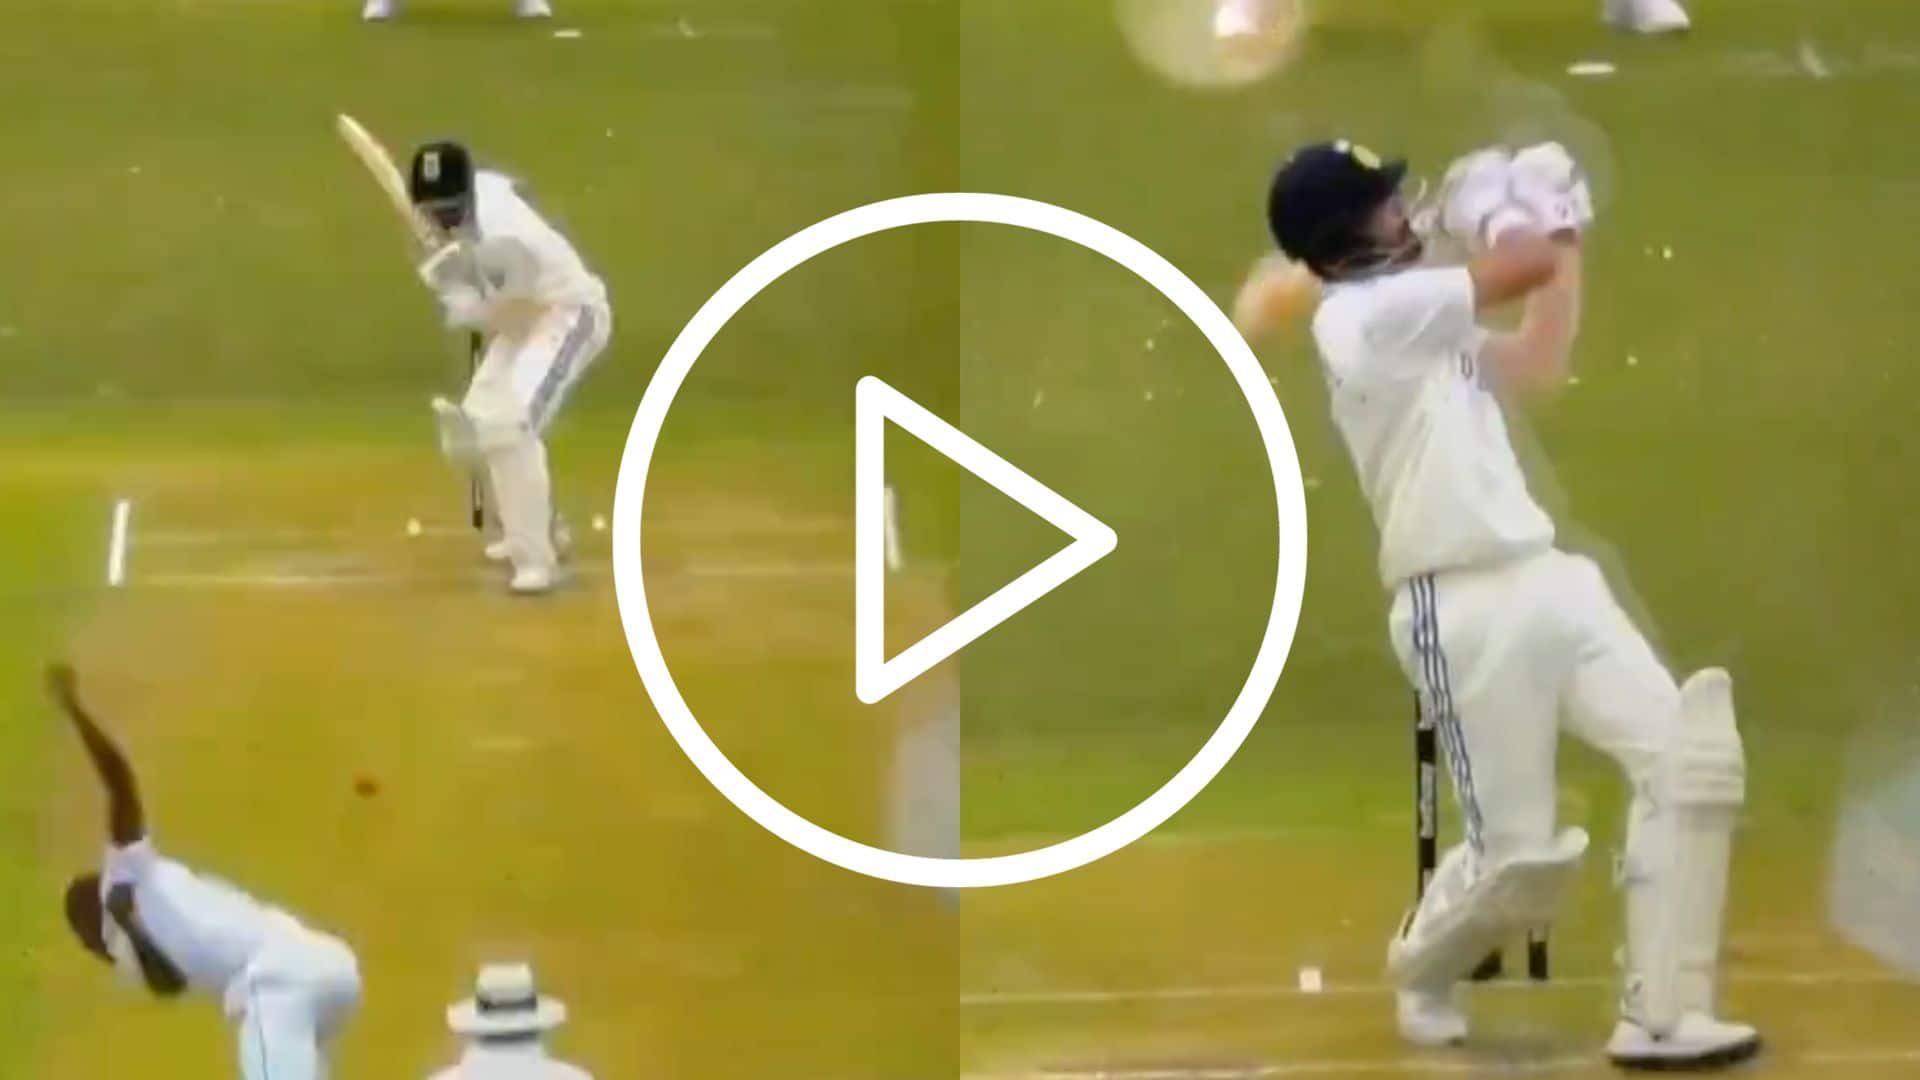 [Watch] KL Rahul ‘Bludgeons’ Kagiso Rabada With A ‘Full-Blooded’ Six